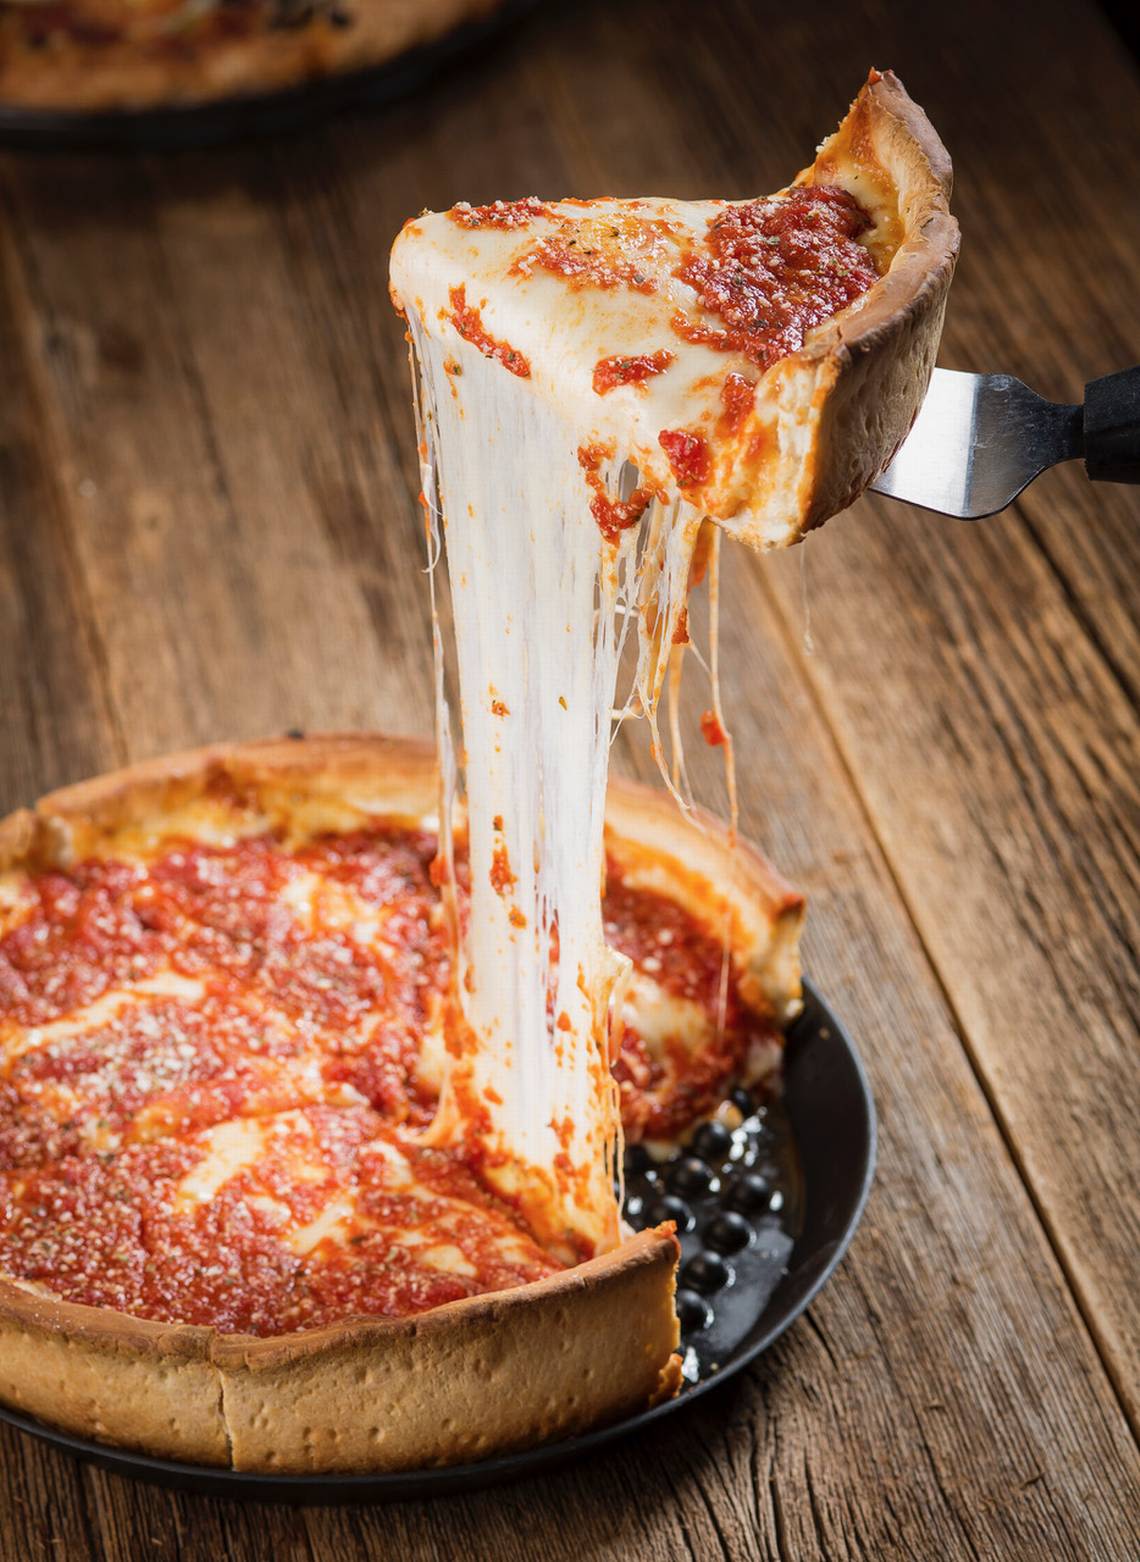 New Chicago-style deep-dish pizza, sandwich restaurant coming to Lexington